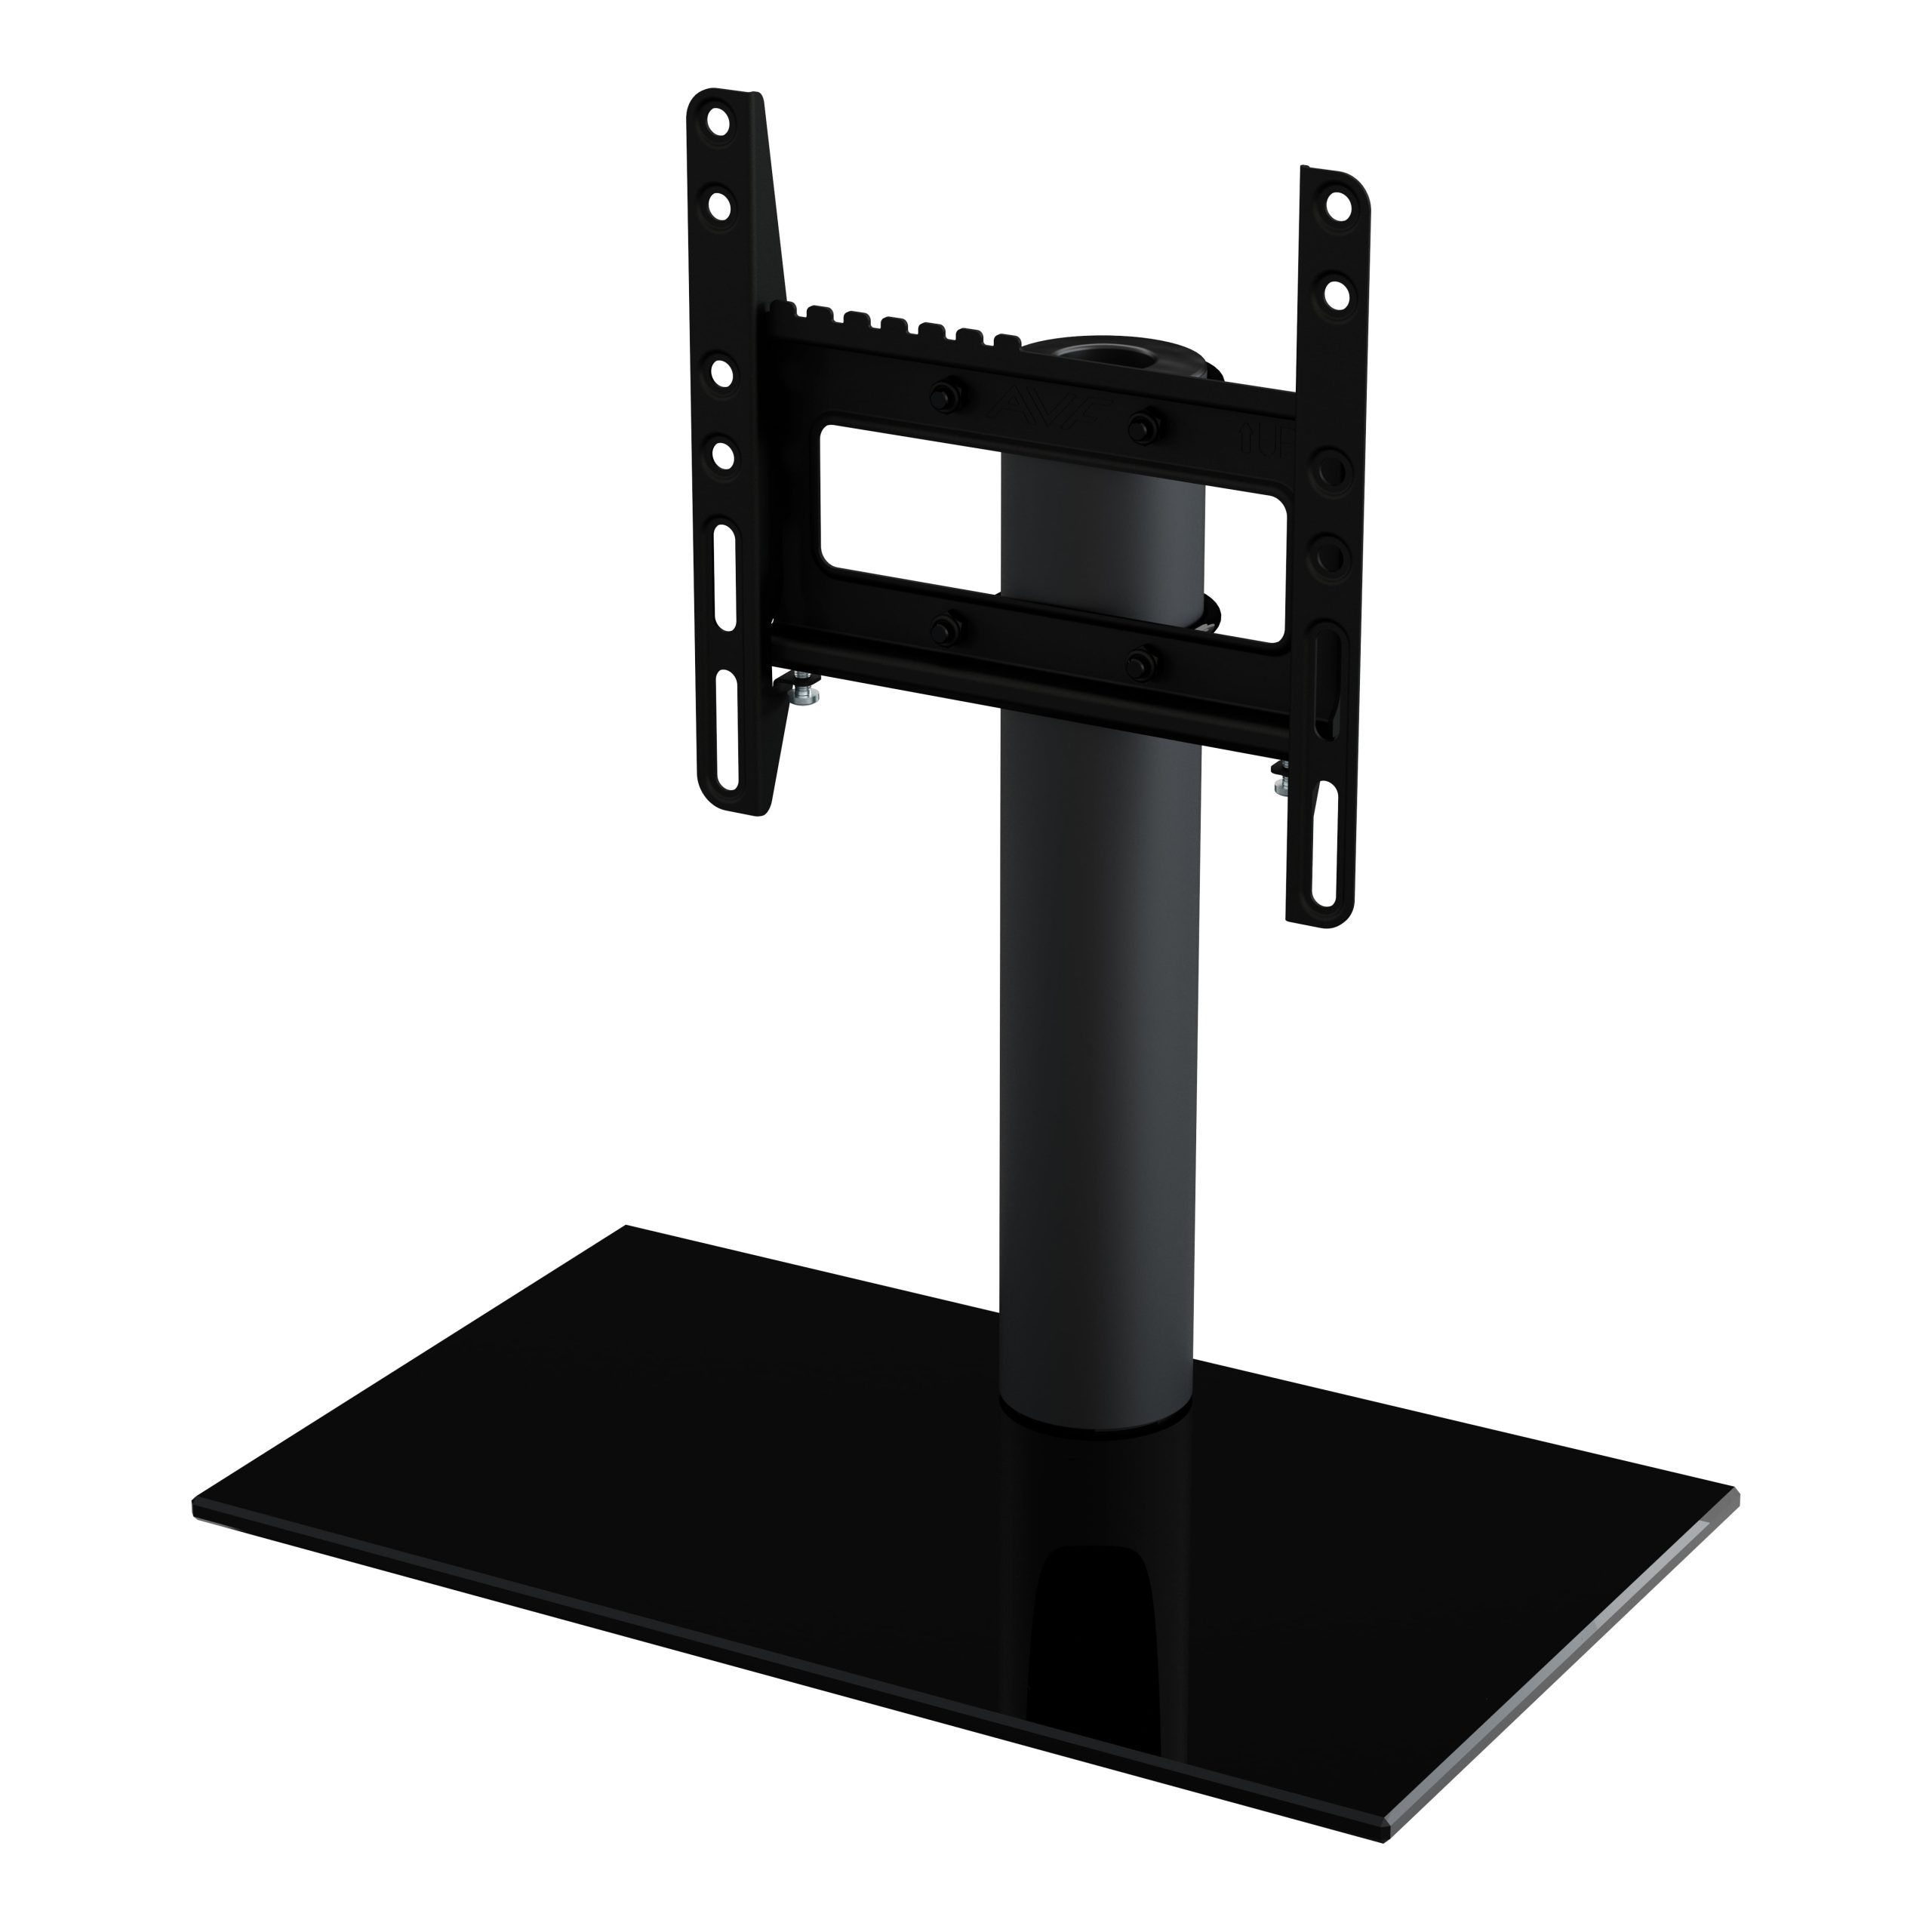 Avf B200bb A Universal Table Top Tv Stand / Tv Base – Fixed Position Intended For Top Shelf Mount Tv Stands (View 15 of 20)